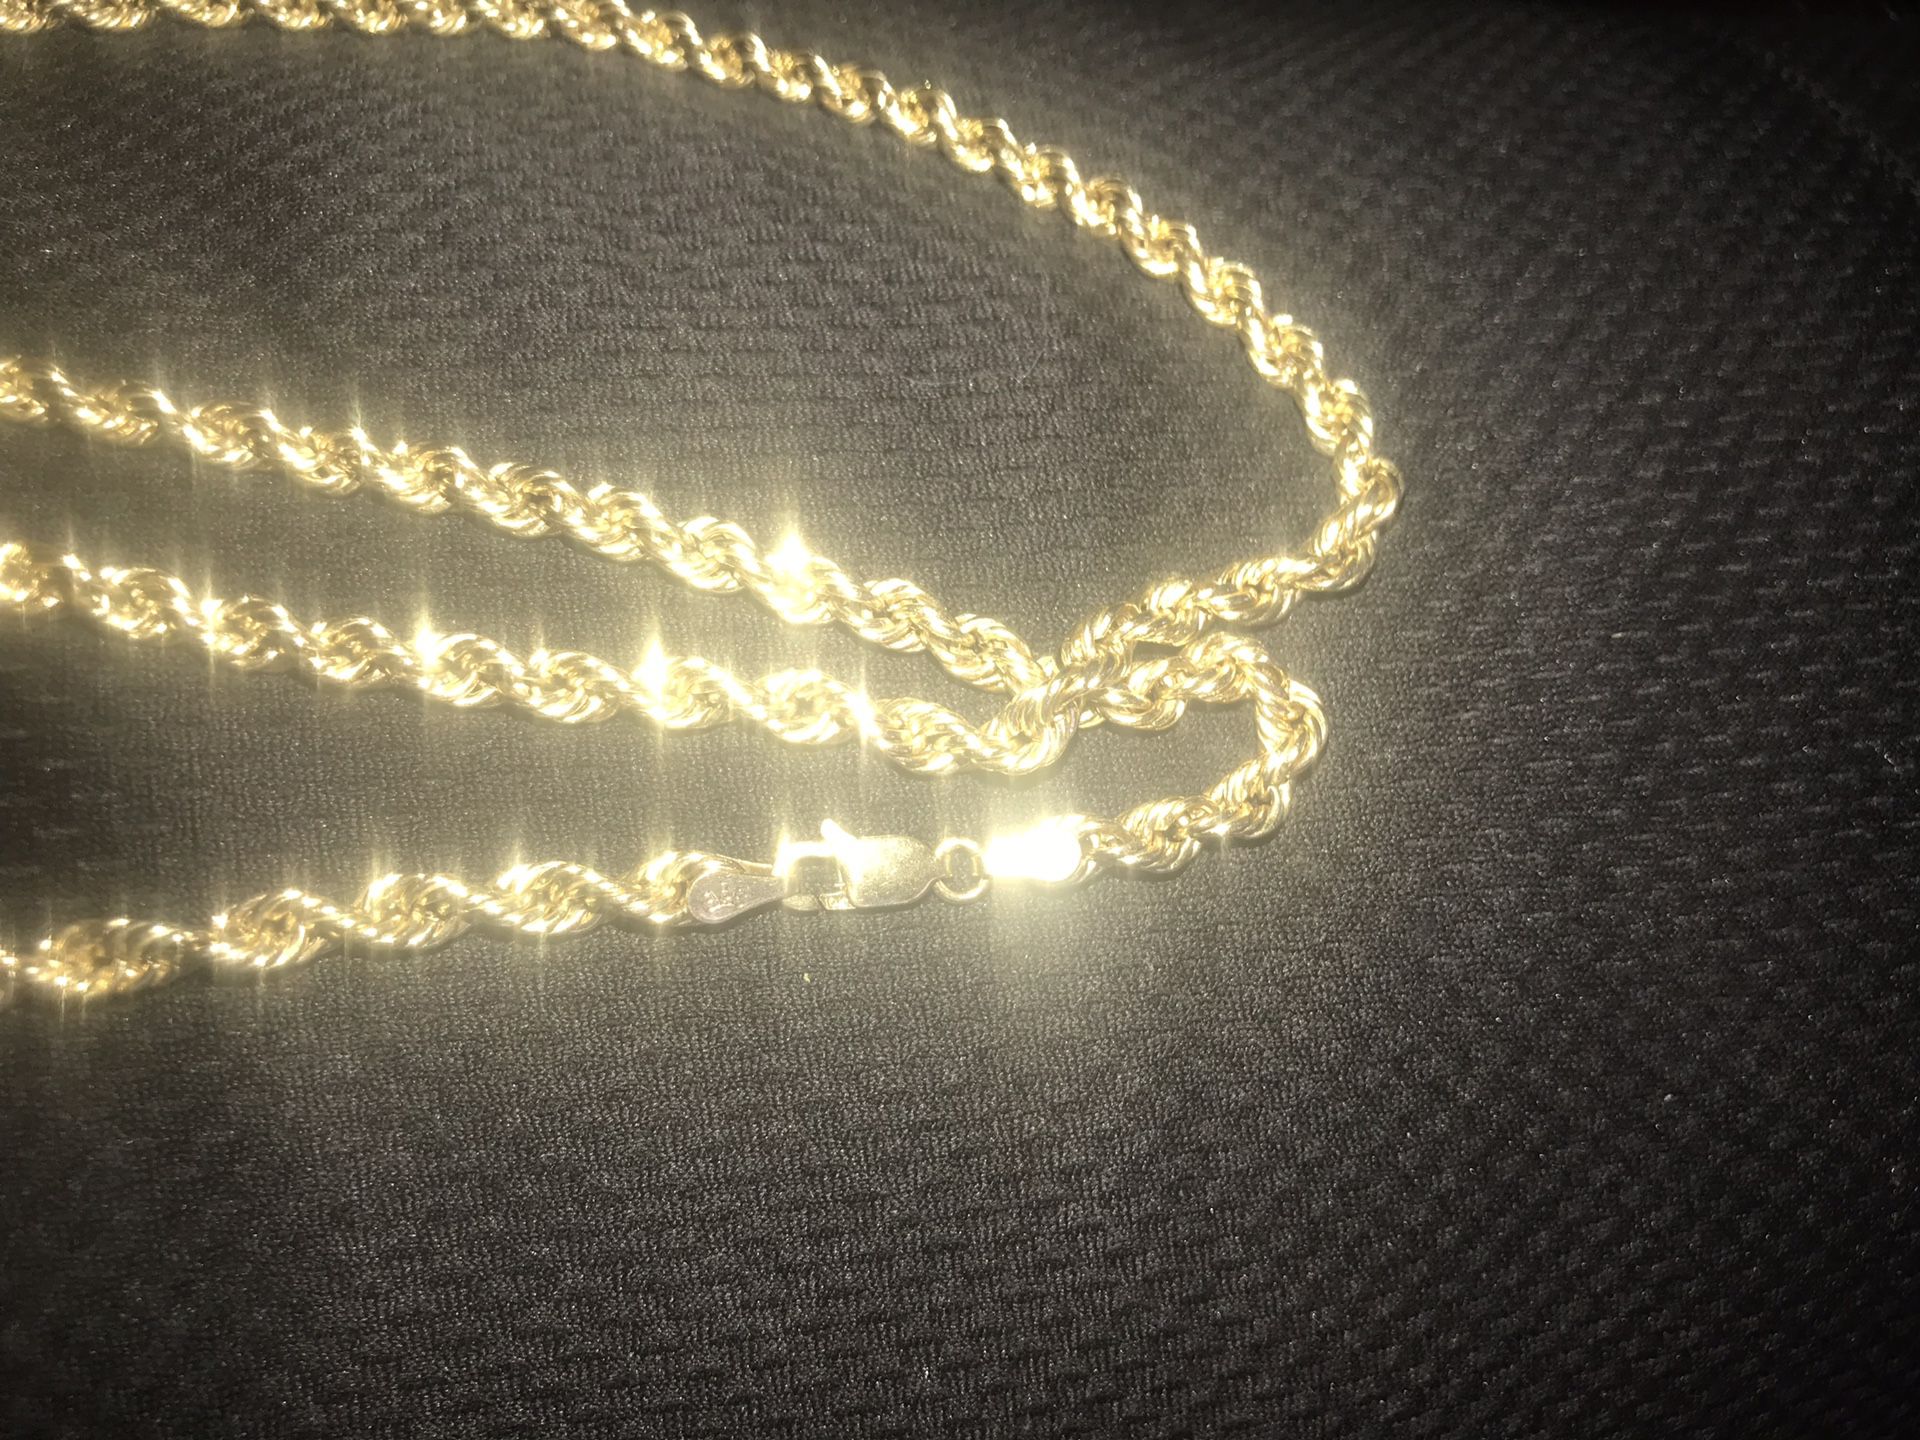 10k gold rope chain